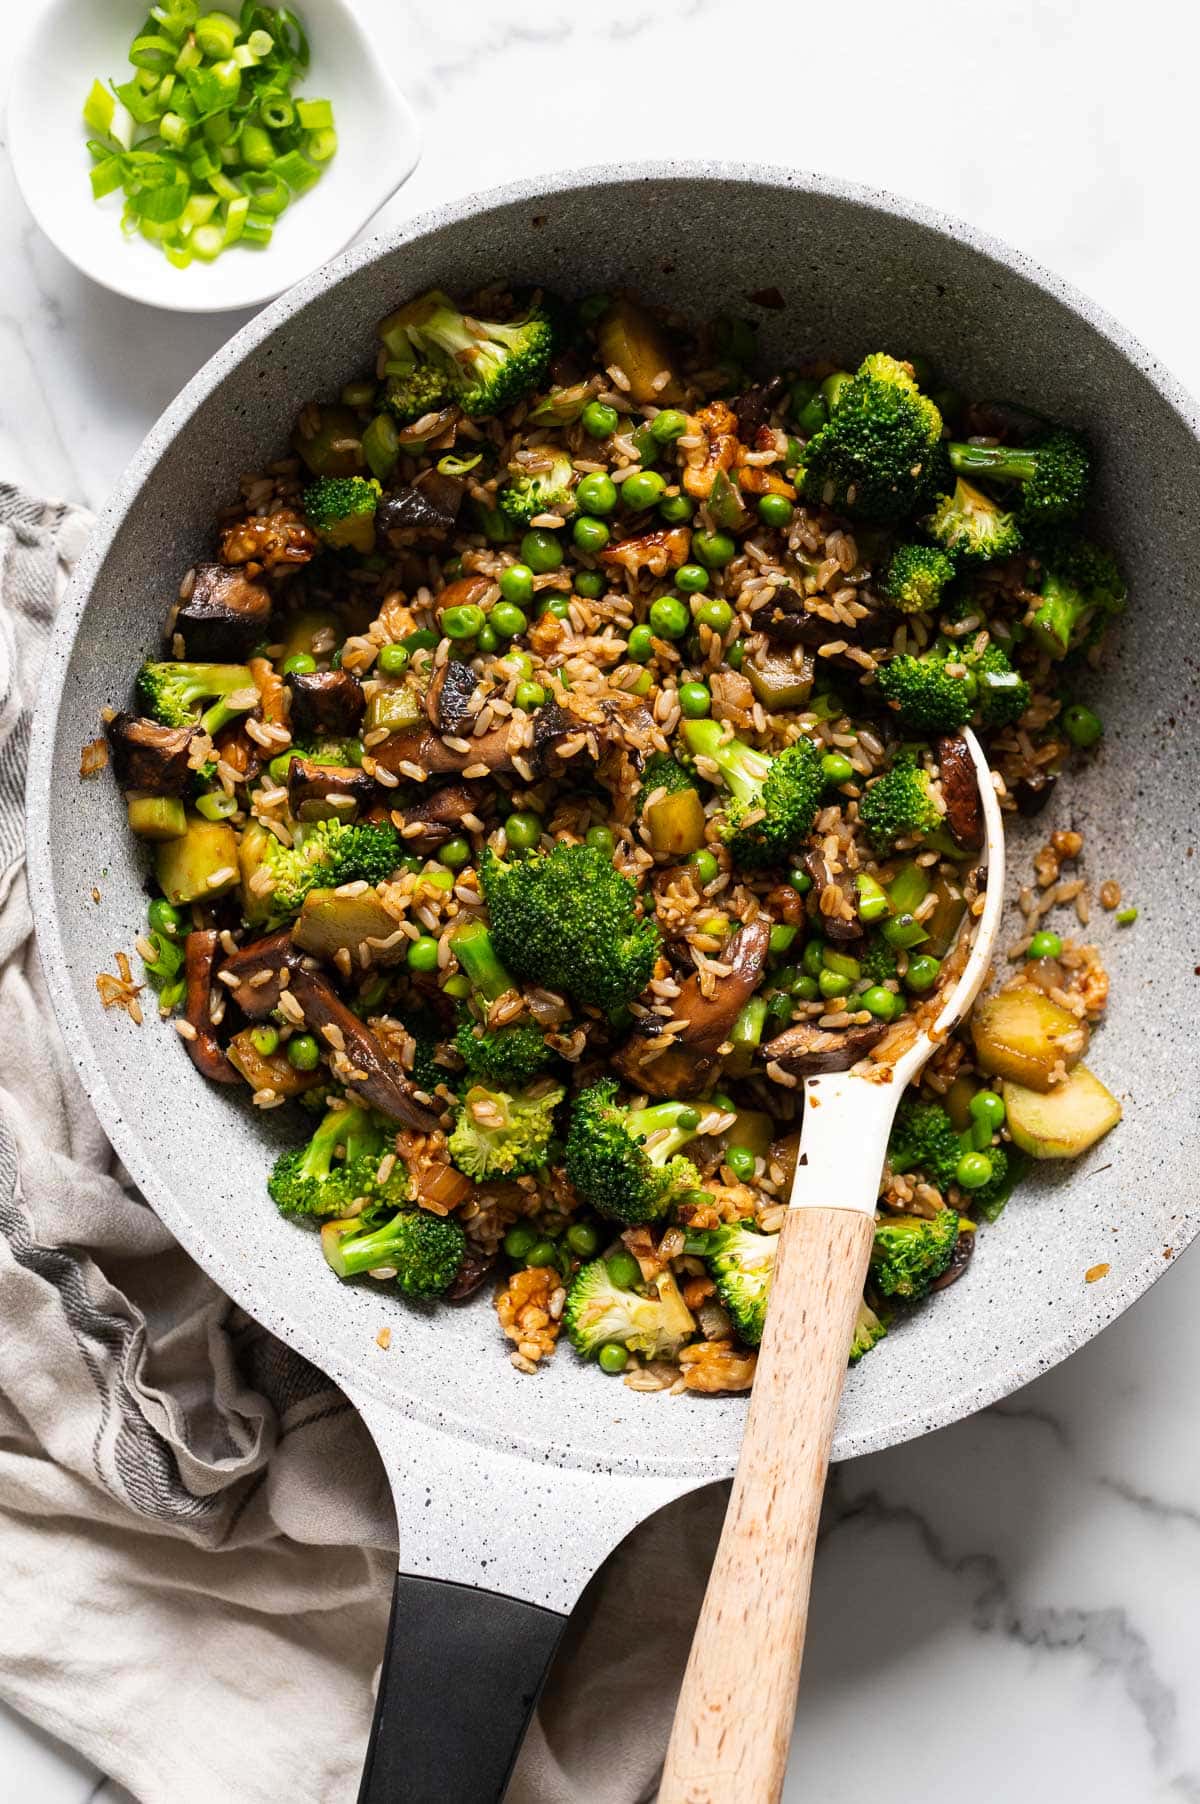 Broccoli mushroom stir fry with peas and brown rice in a skillet with a spoon.